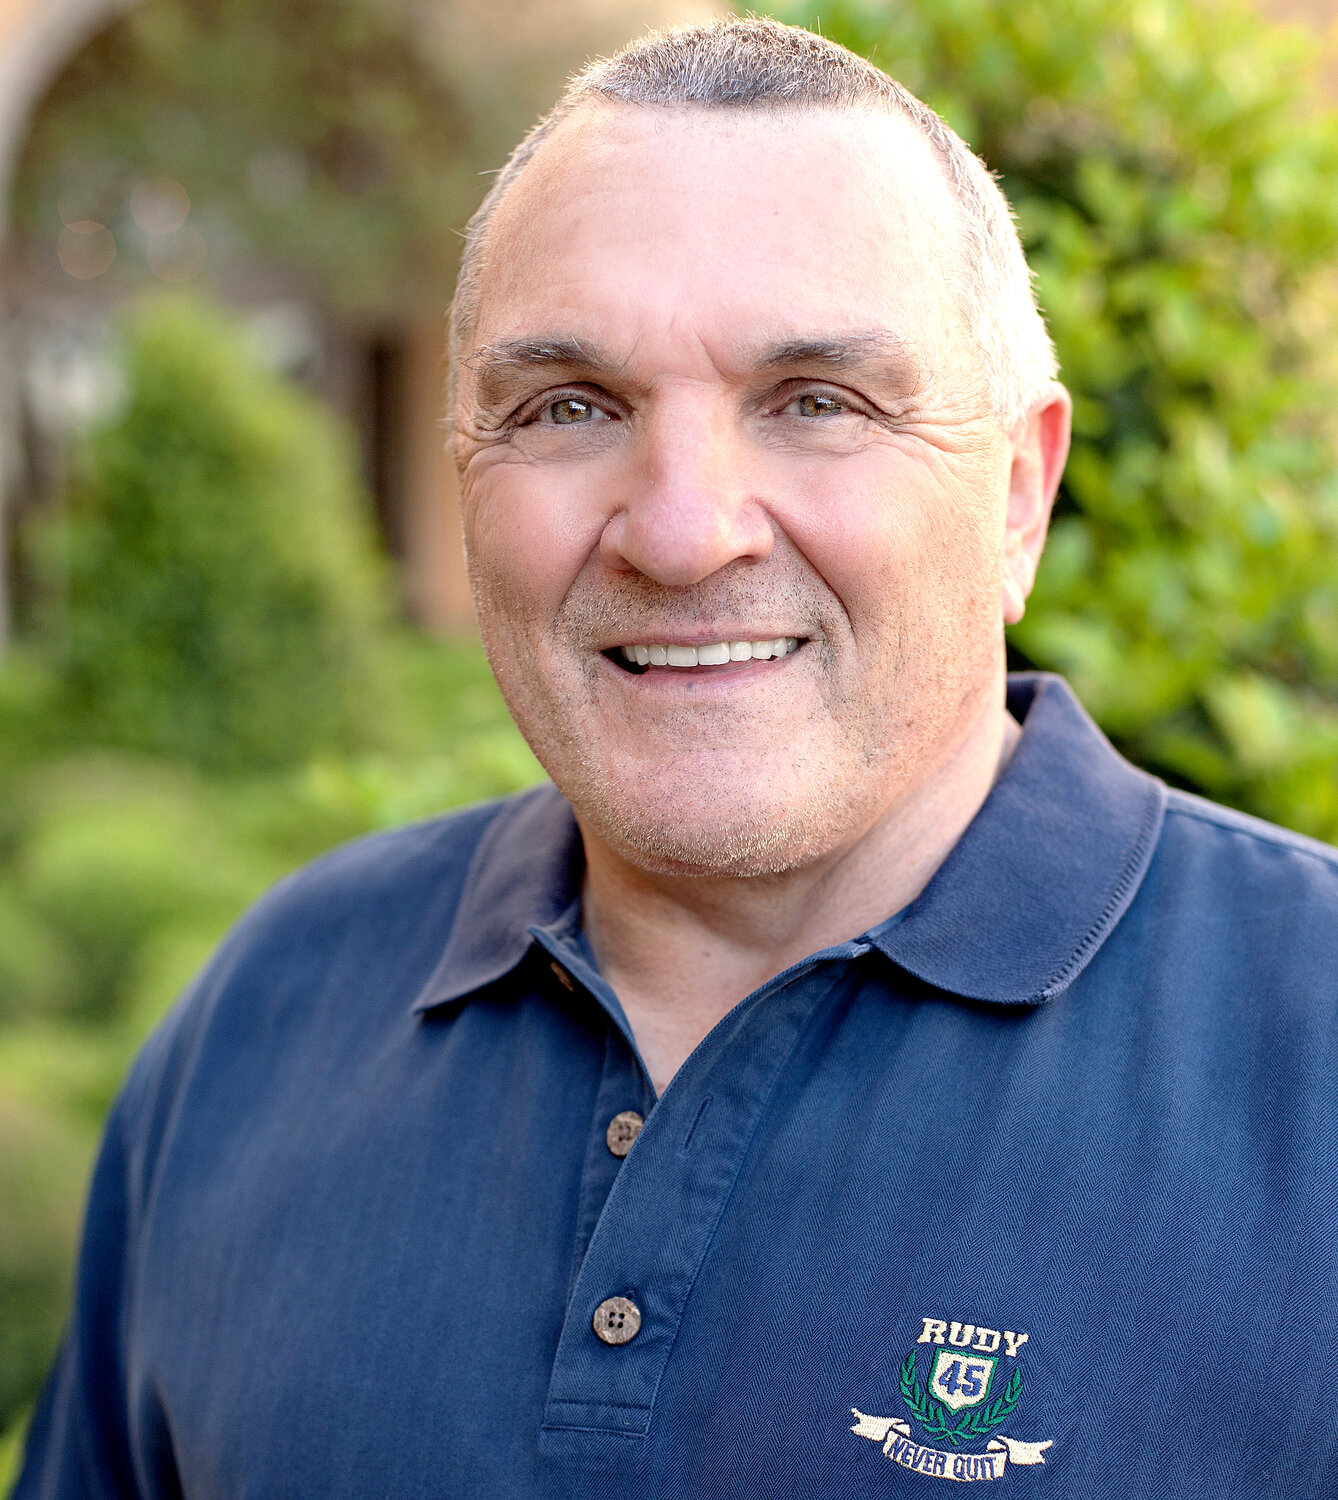 Daniel "Rudy" Ruettiger, whose life story was the subject of the 1993 movie “Rudy,” will be the featured speaker at an upcoming event in Glendale.